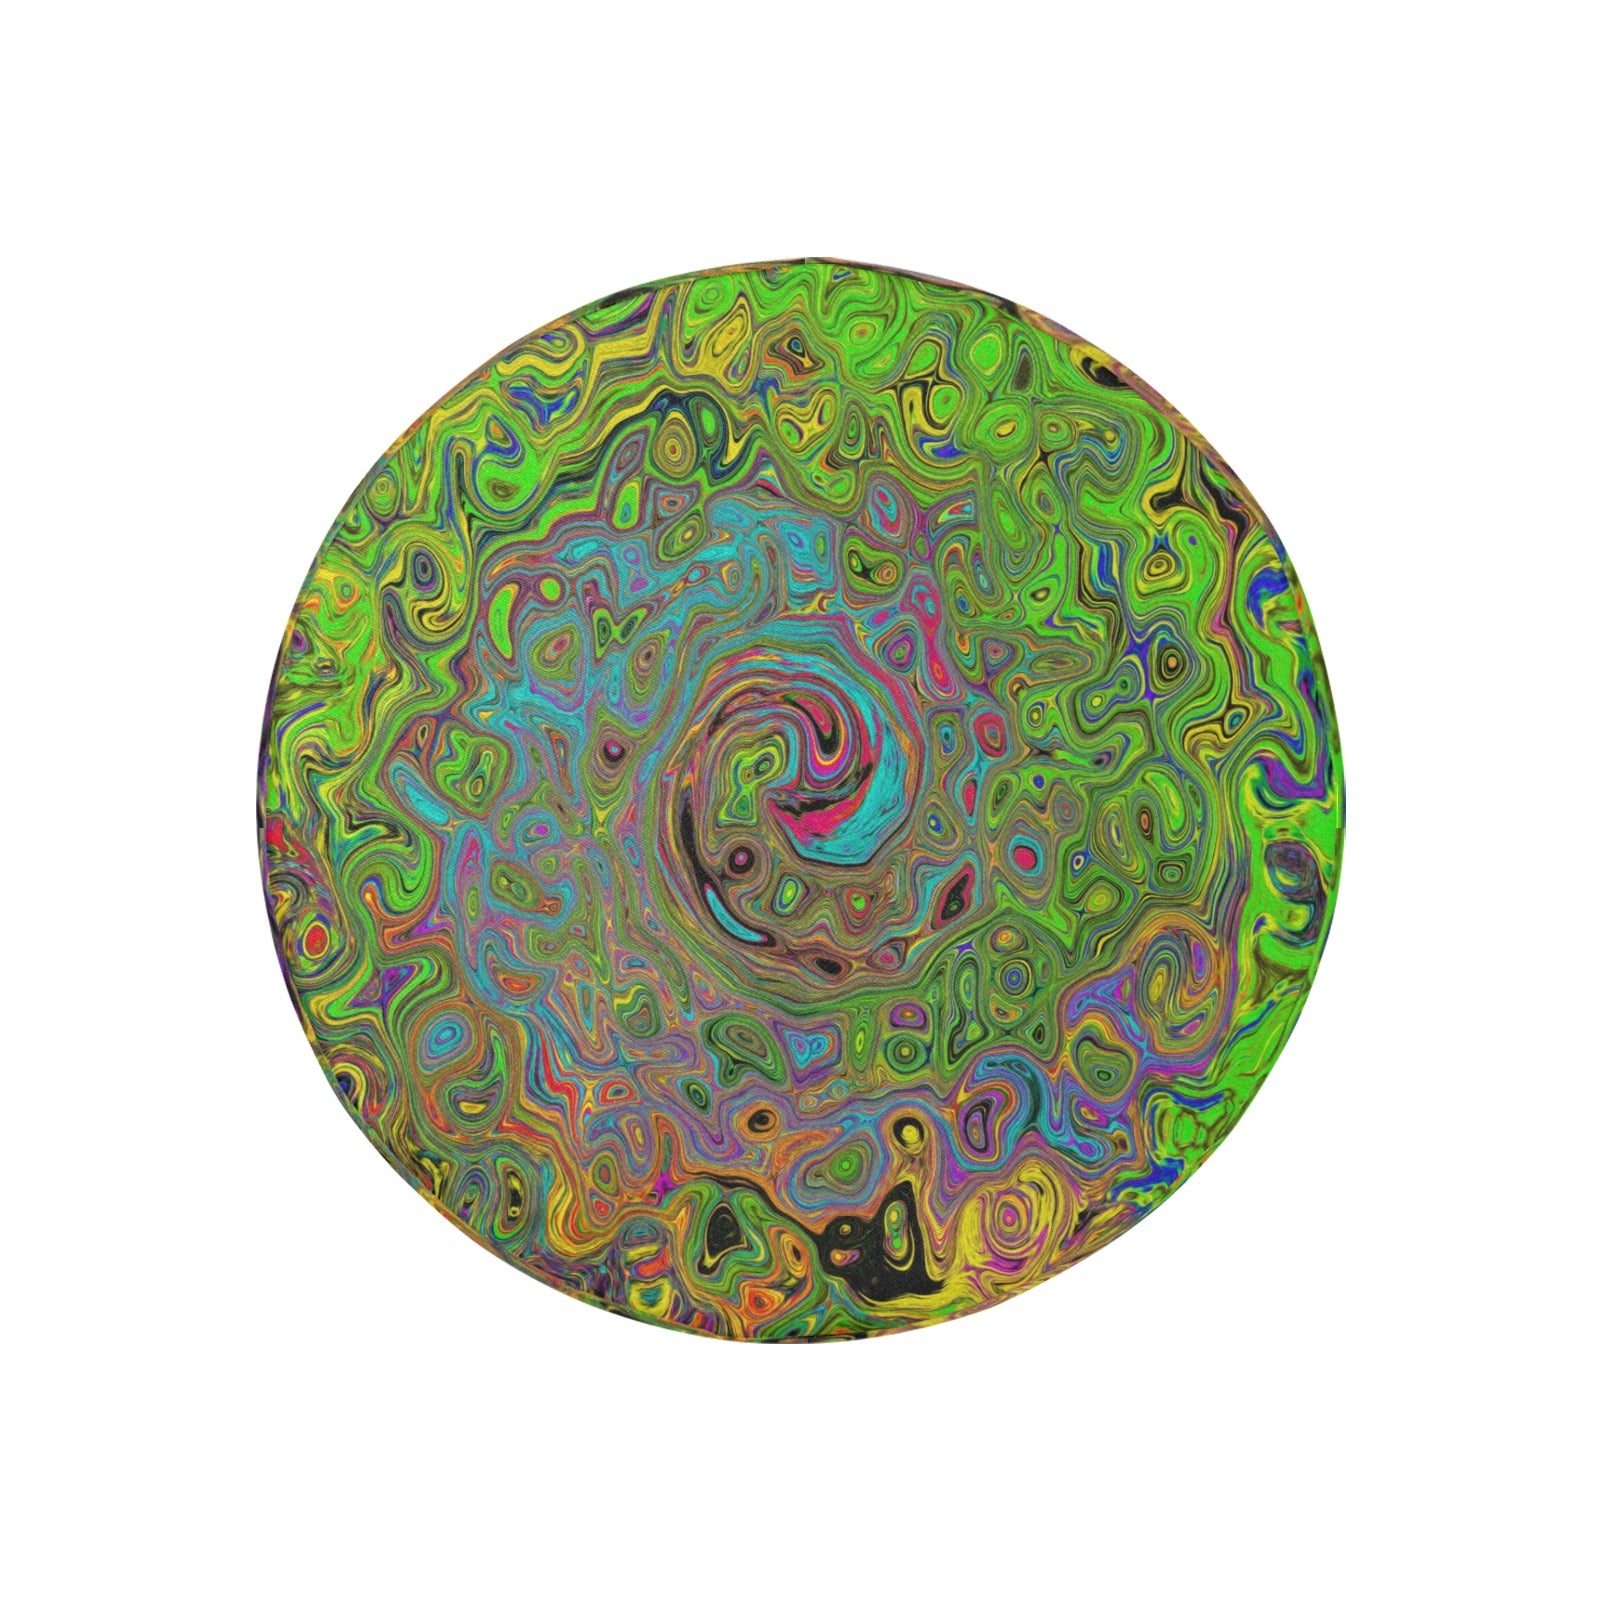 Spare Tire Covers, Groovy Abstract Retro Lime Green and Blue Swirl - Small